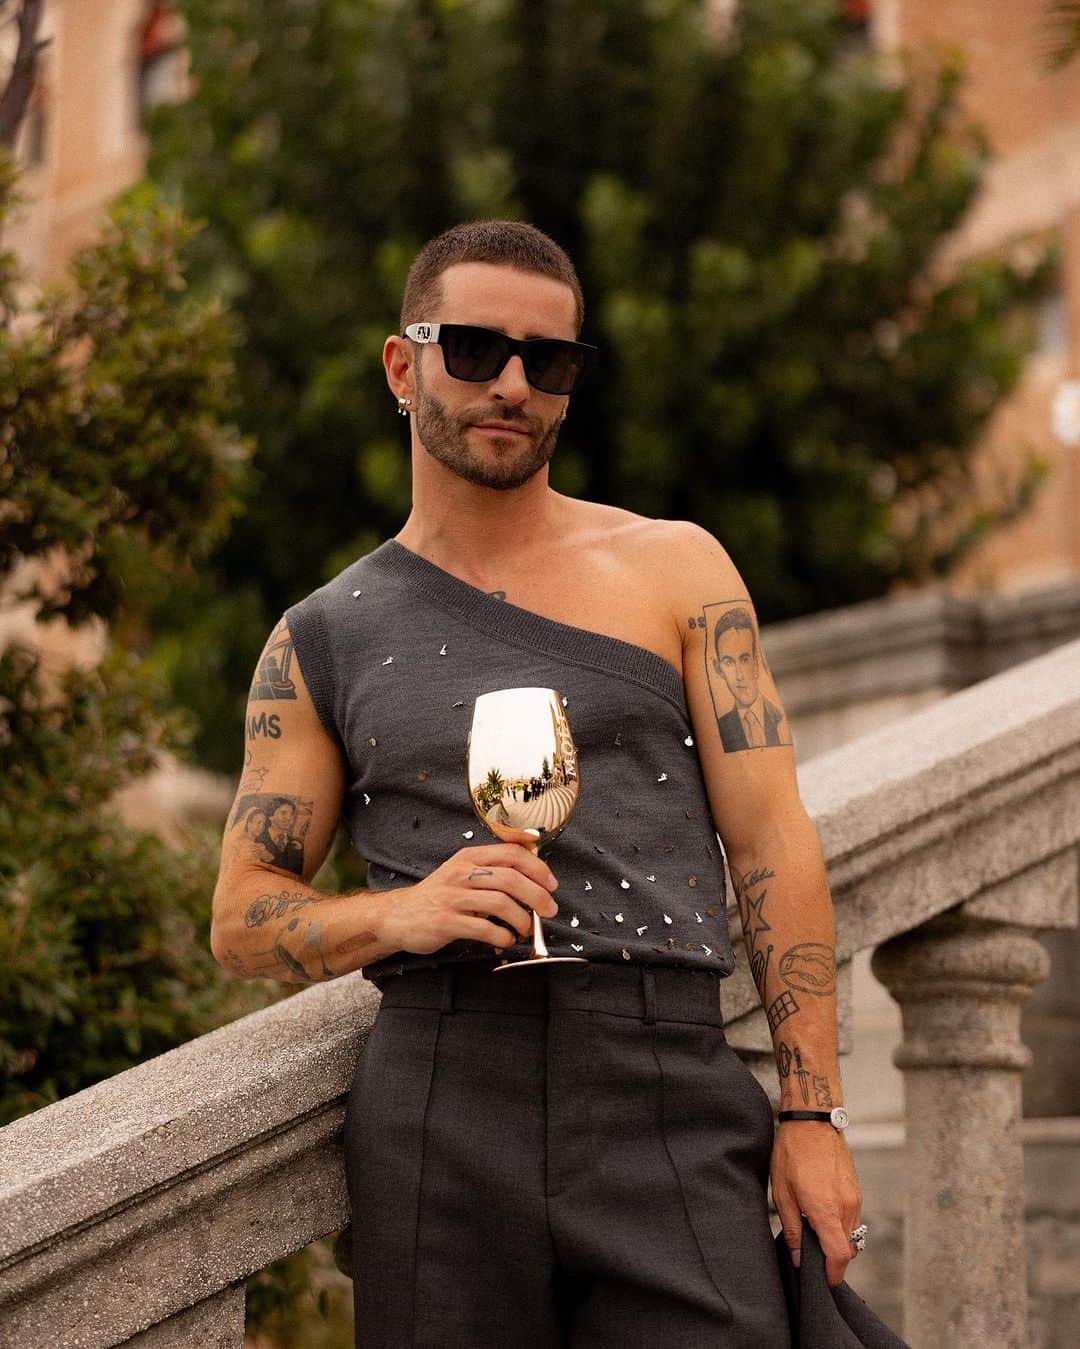 Moët & Chandon Officialのインスタグラム：「A toast to elegance, cinema and togetherness. Embrace the unique atmosphere of the 80th Venice International Film Festival with our guests @pelayodiaz @vickykaya_ @kamo.mafokwane  #ToastWithMoet #MoetChandon #Venezia80  This material is not intended to be viewed by persons under the legal alcohol drinking age or in countries with restrictions on advertising on alcoholic beverages. ENJOY MOËT RESPONSIBLY.」